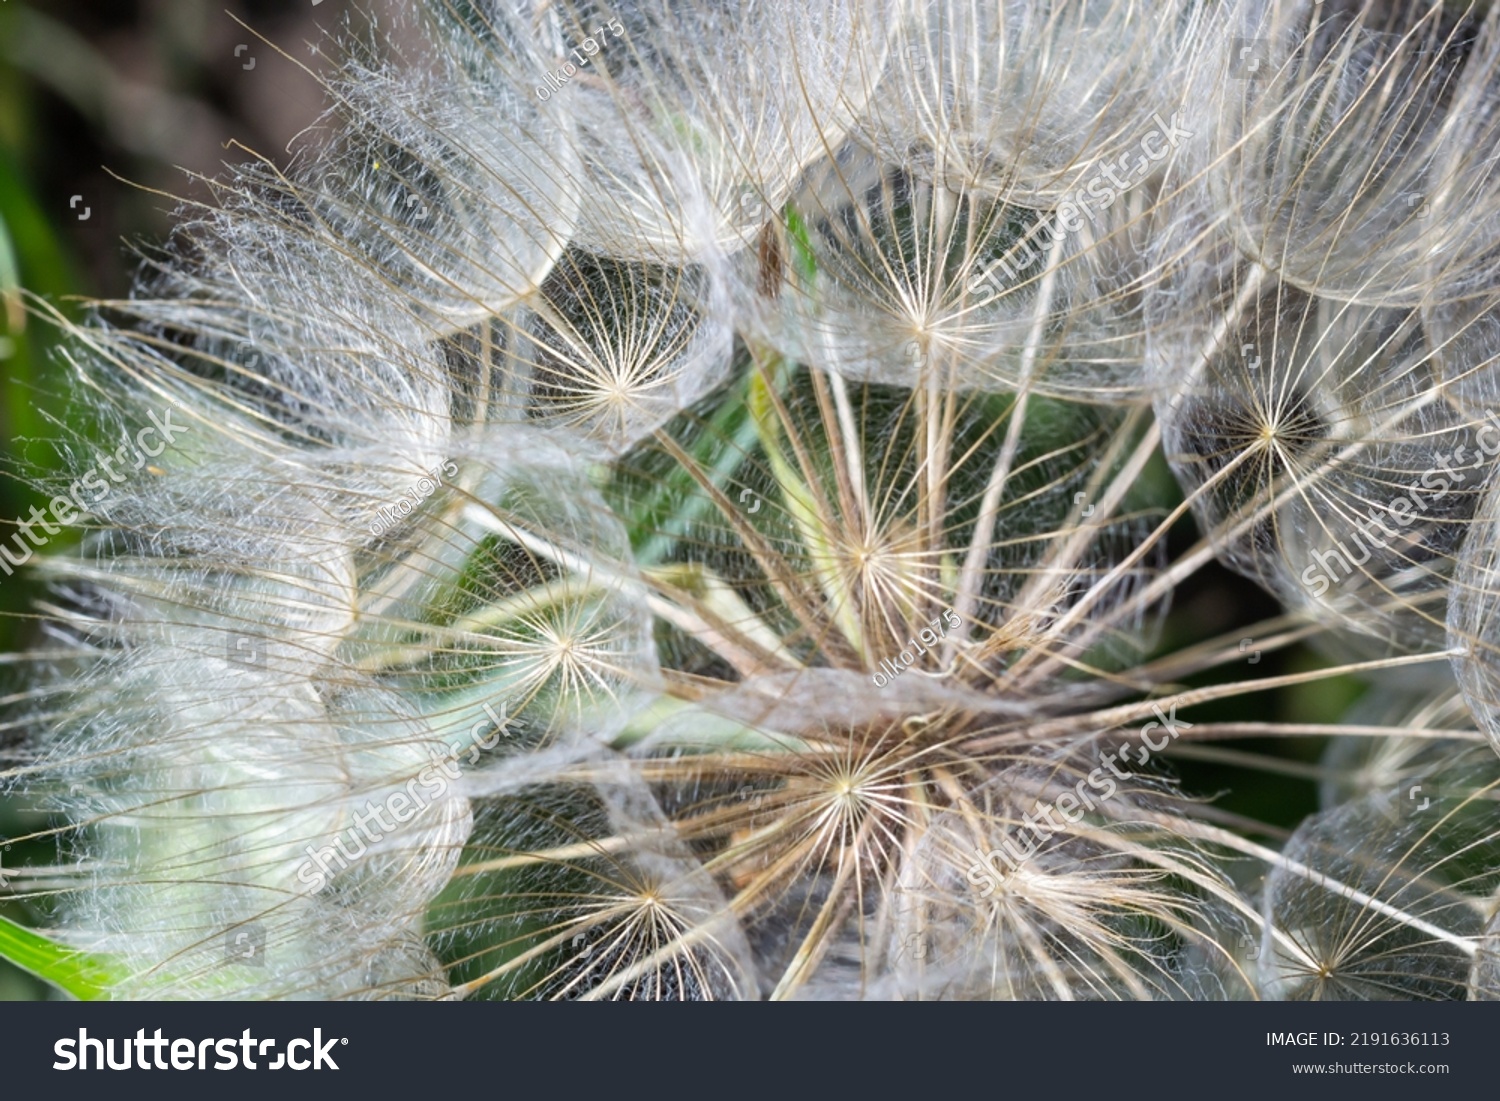 Goatsbeard, Tragopogon pratensis, flower seed head close up with feathery seeds and a blurred background of leaves. #2191636113